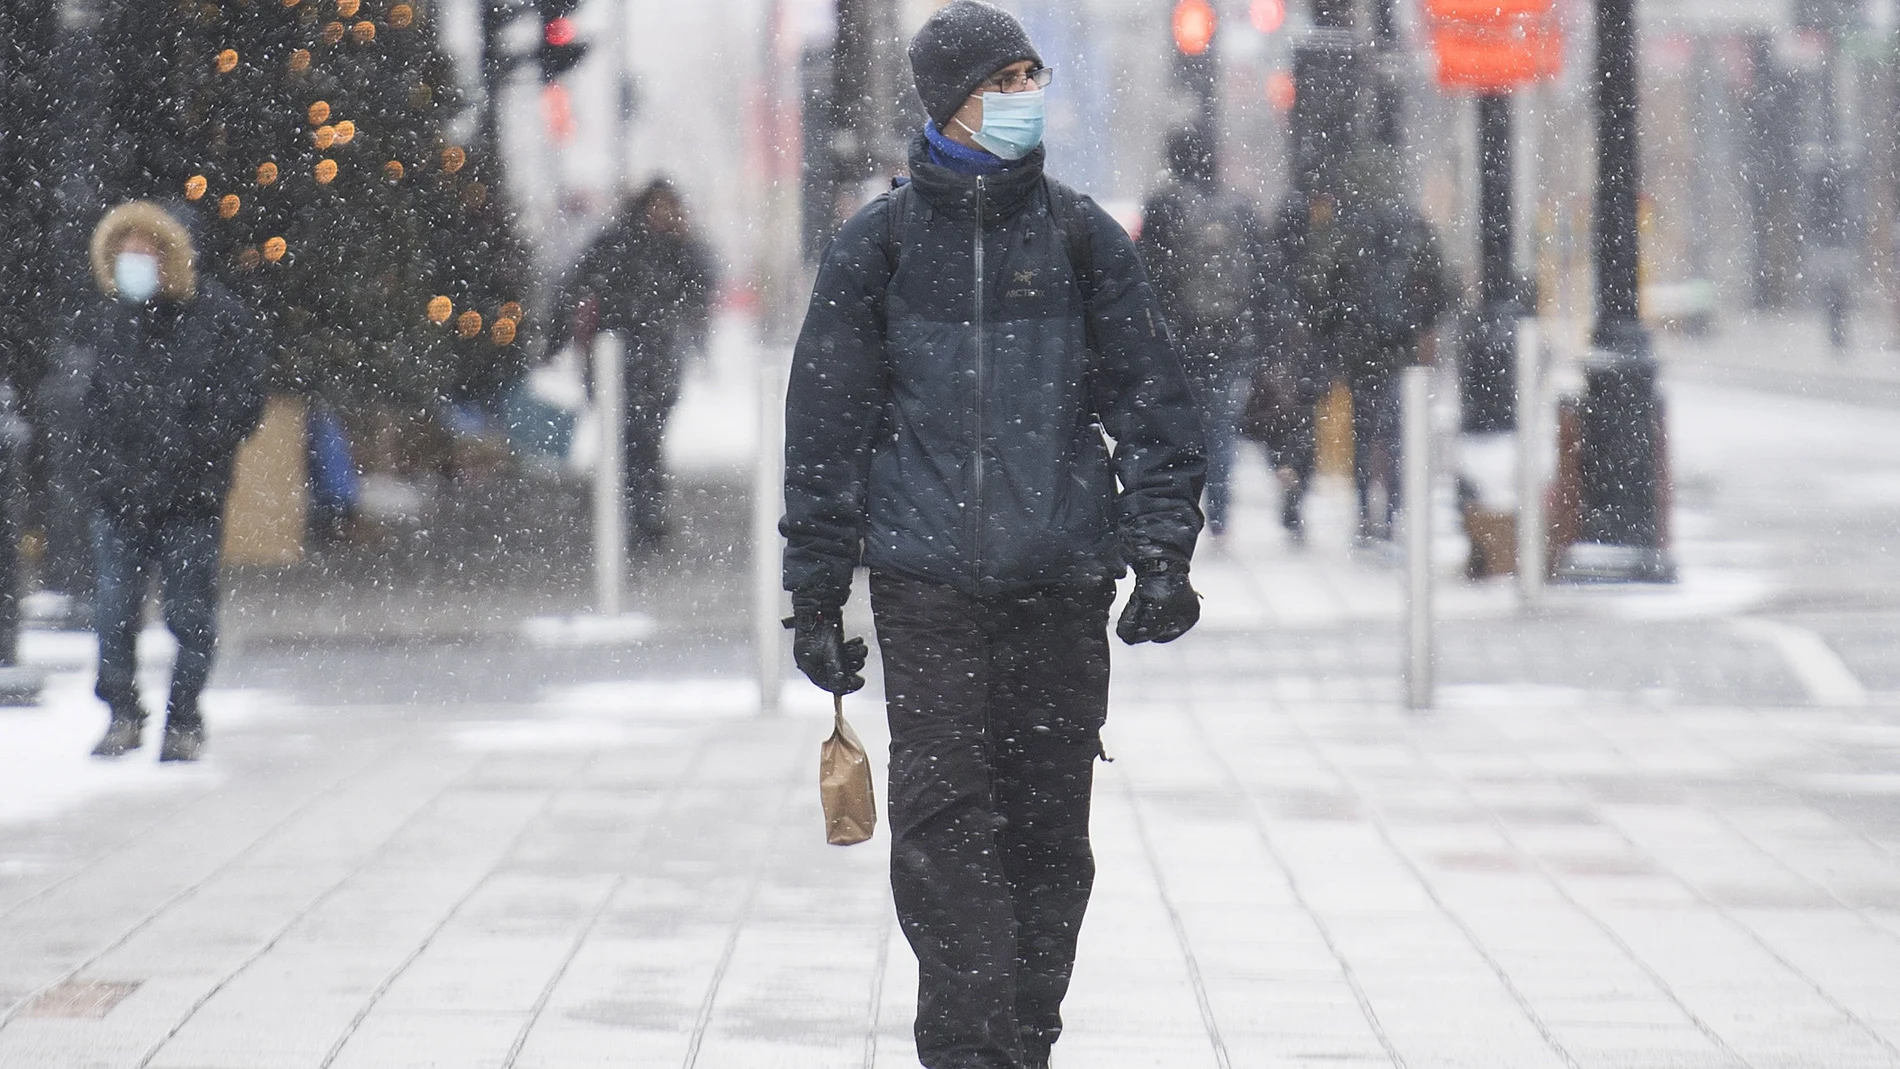 A man wears a face mask as he walks along Sainte-Catherine Street on Boxing Day in Montreal, Saturday, Dec. 26, 2020, as the COVID-19 pandemic continues in Canada and around the world. (Graham Hughes/The Canadian Press via AP)